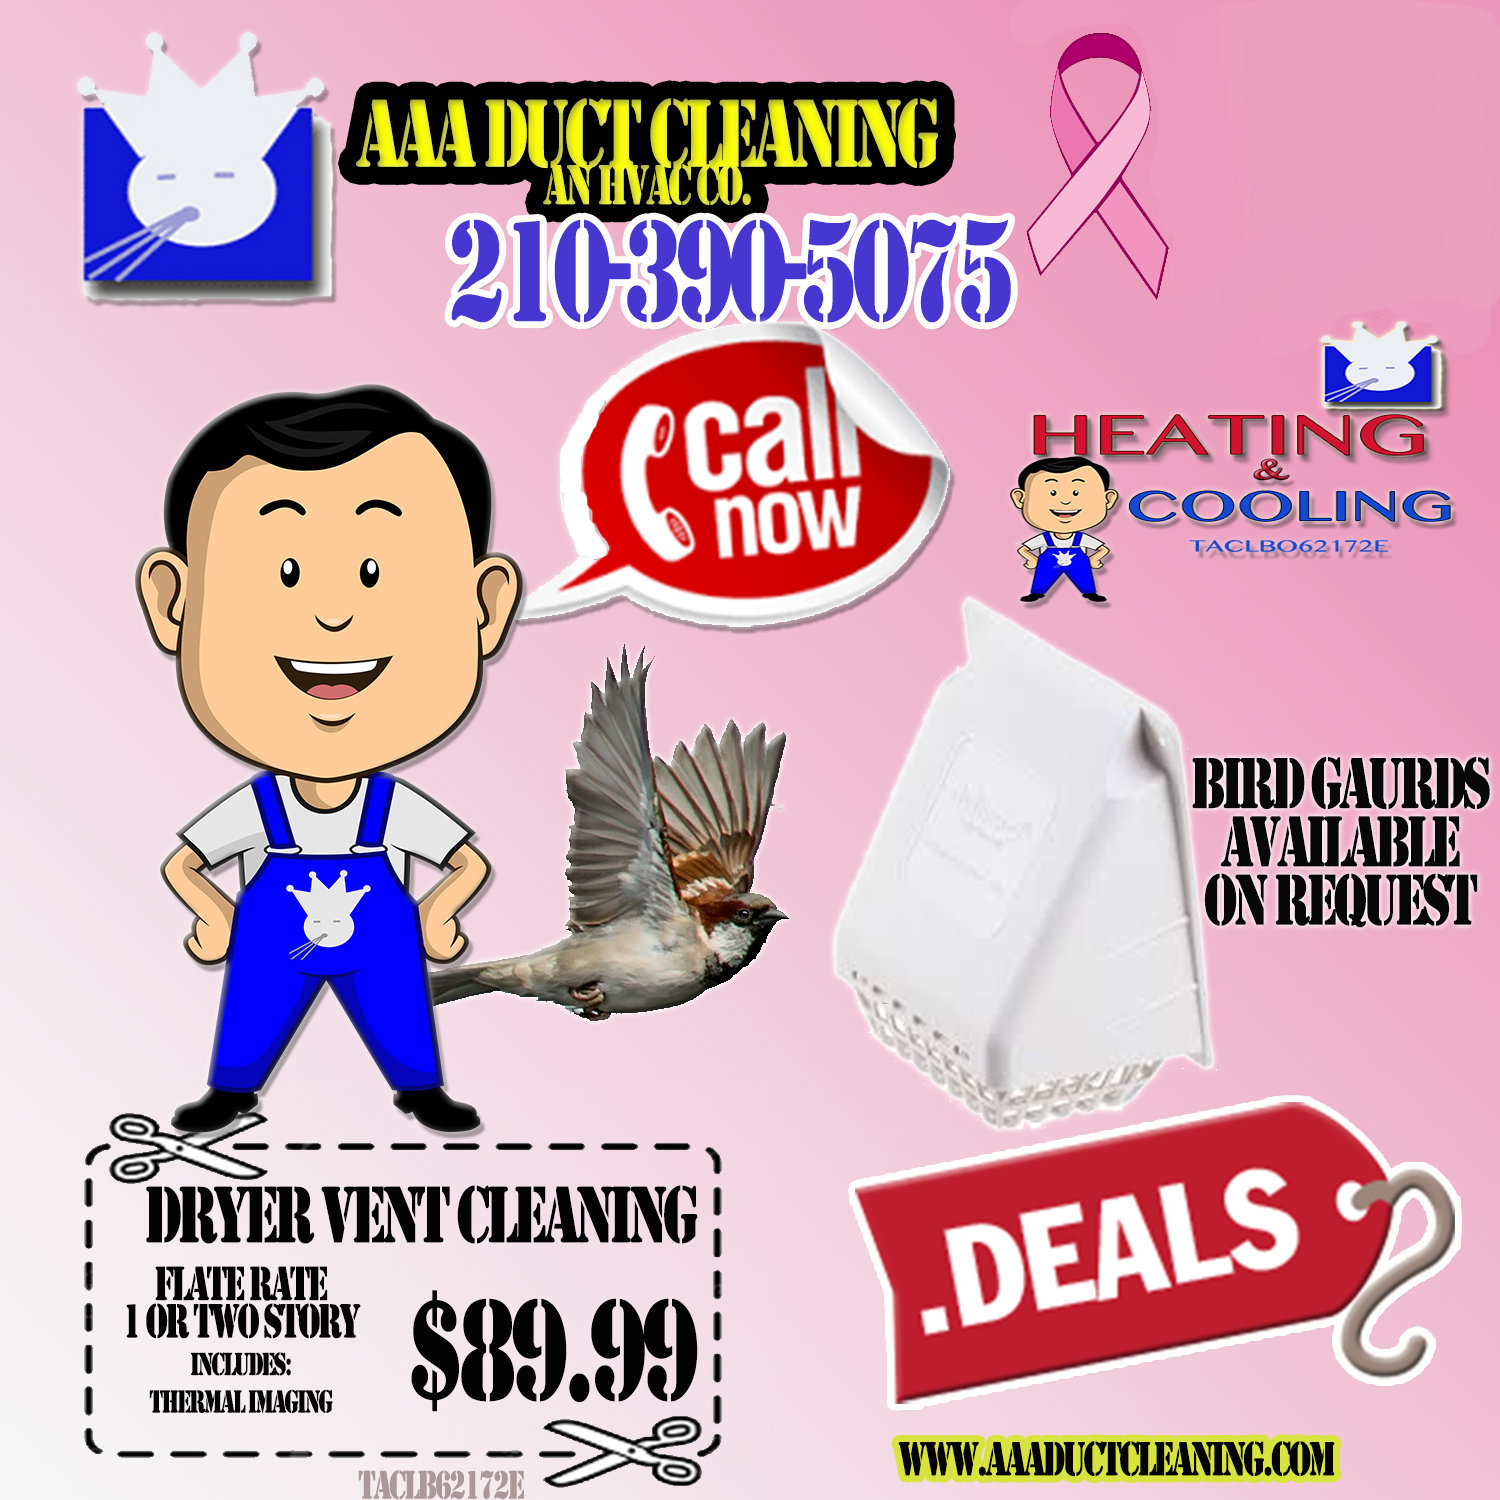 Our Dryer Vent cleaning Service at an affordable cost San Antonio. Dryers need the appropraite airflow to help expell excess lint  and condensation from the dryer during the drying cycle. Experts recommend annual dryer vent cleaning and dryer vent booster maintenance as well. Contact and expert at AAA Duct Cleaning at 210-390-5075